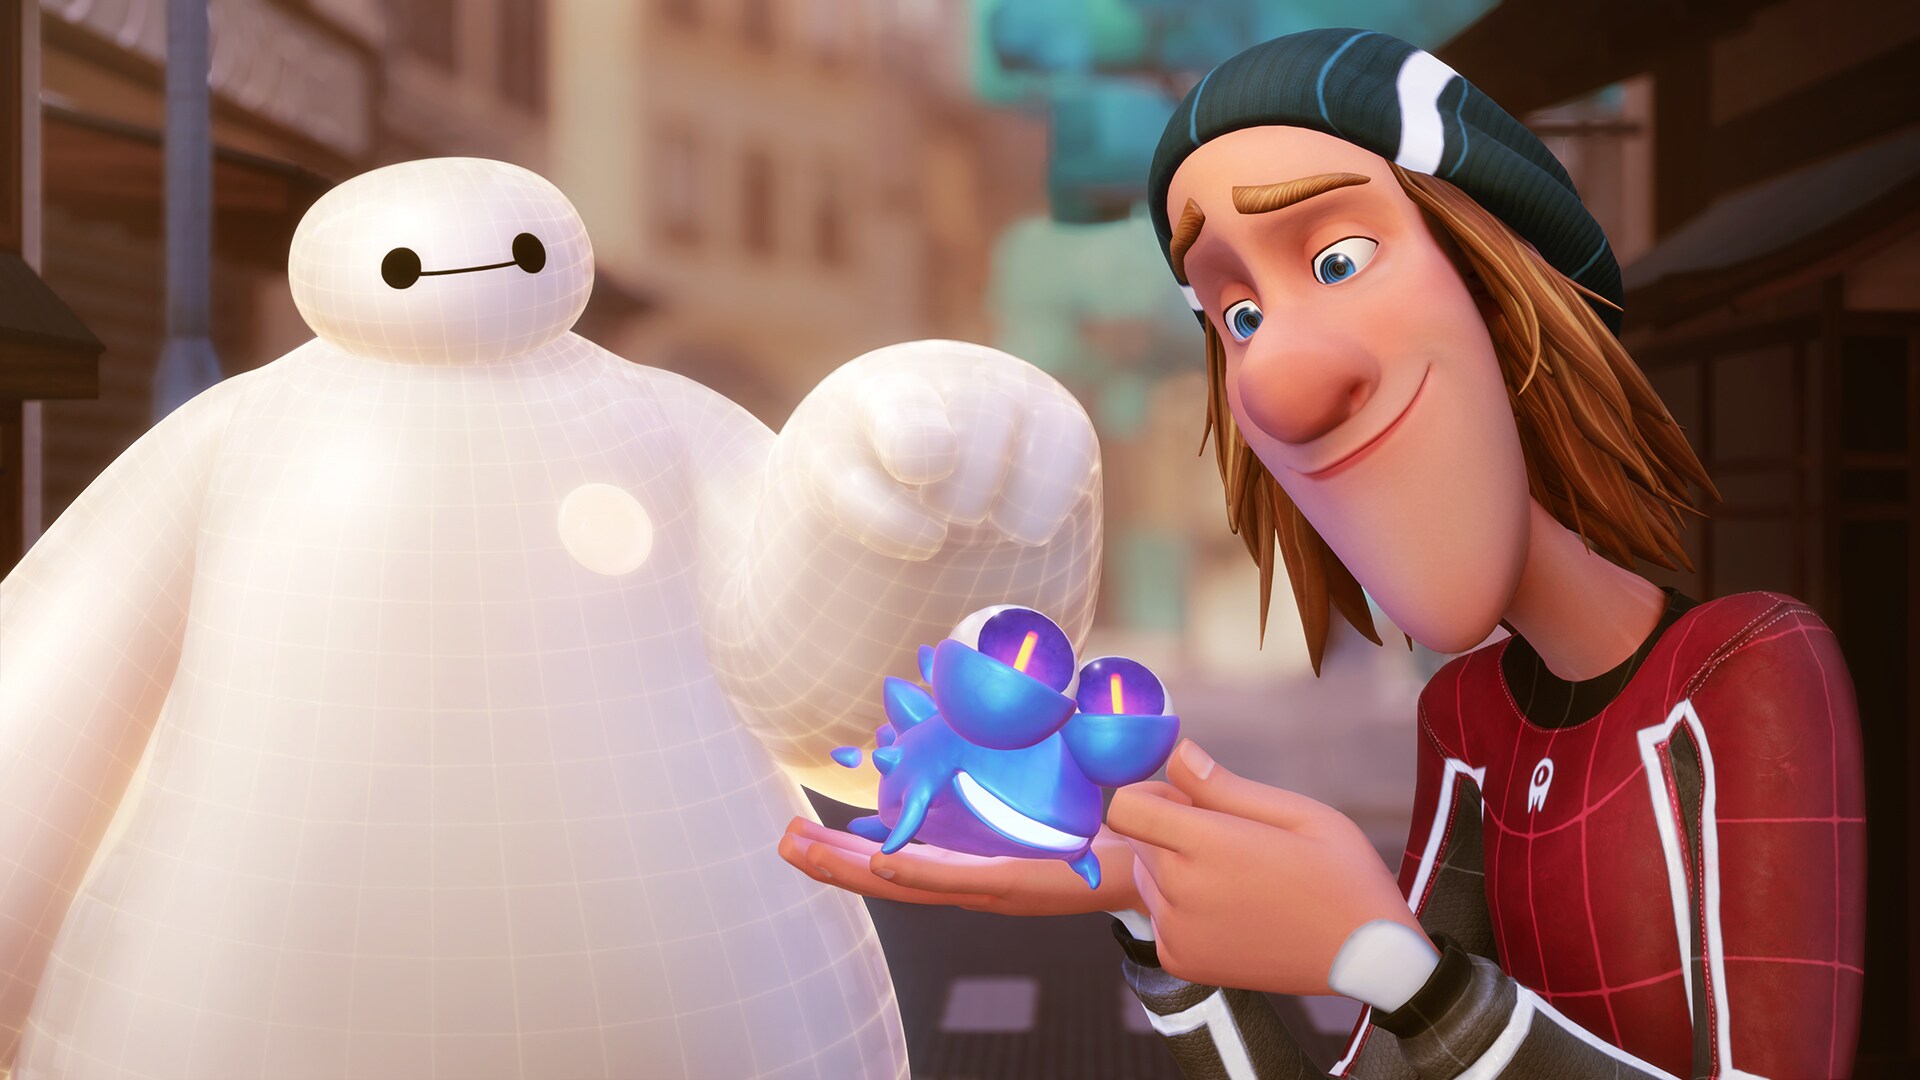 Disney’s Immersive "Baymax Dreams" Short Pushes New Boundaries for Interactive Animation, Premieres at Sundance Festival New Frontier